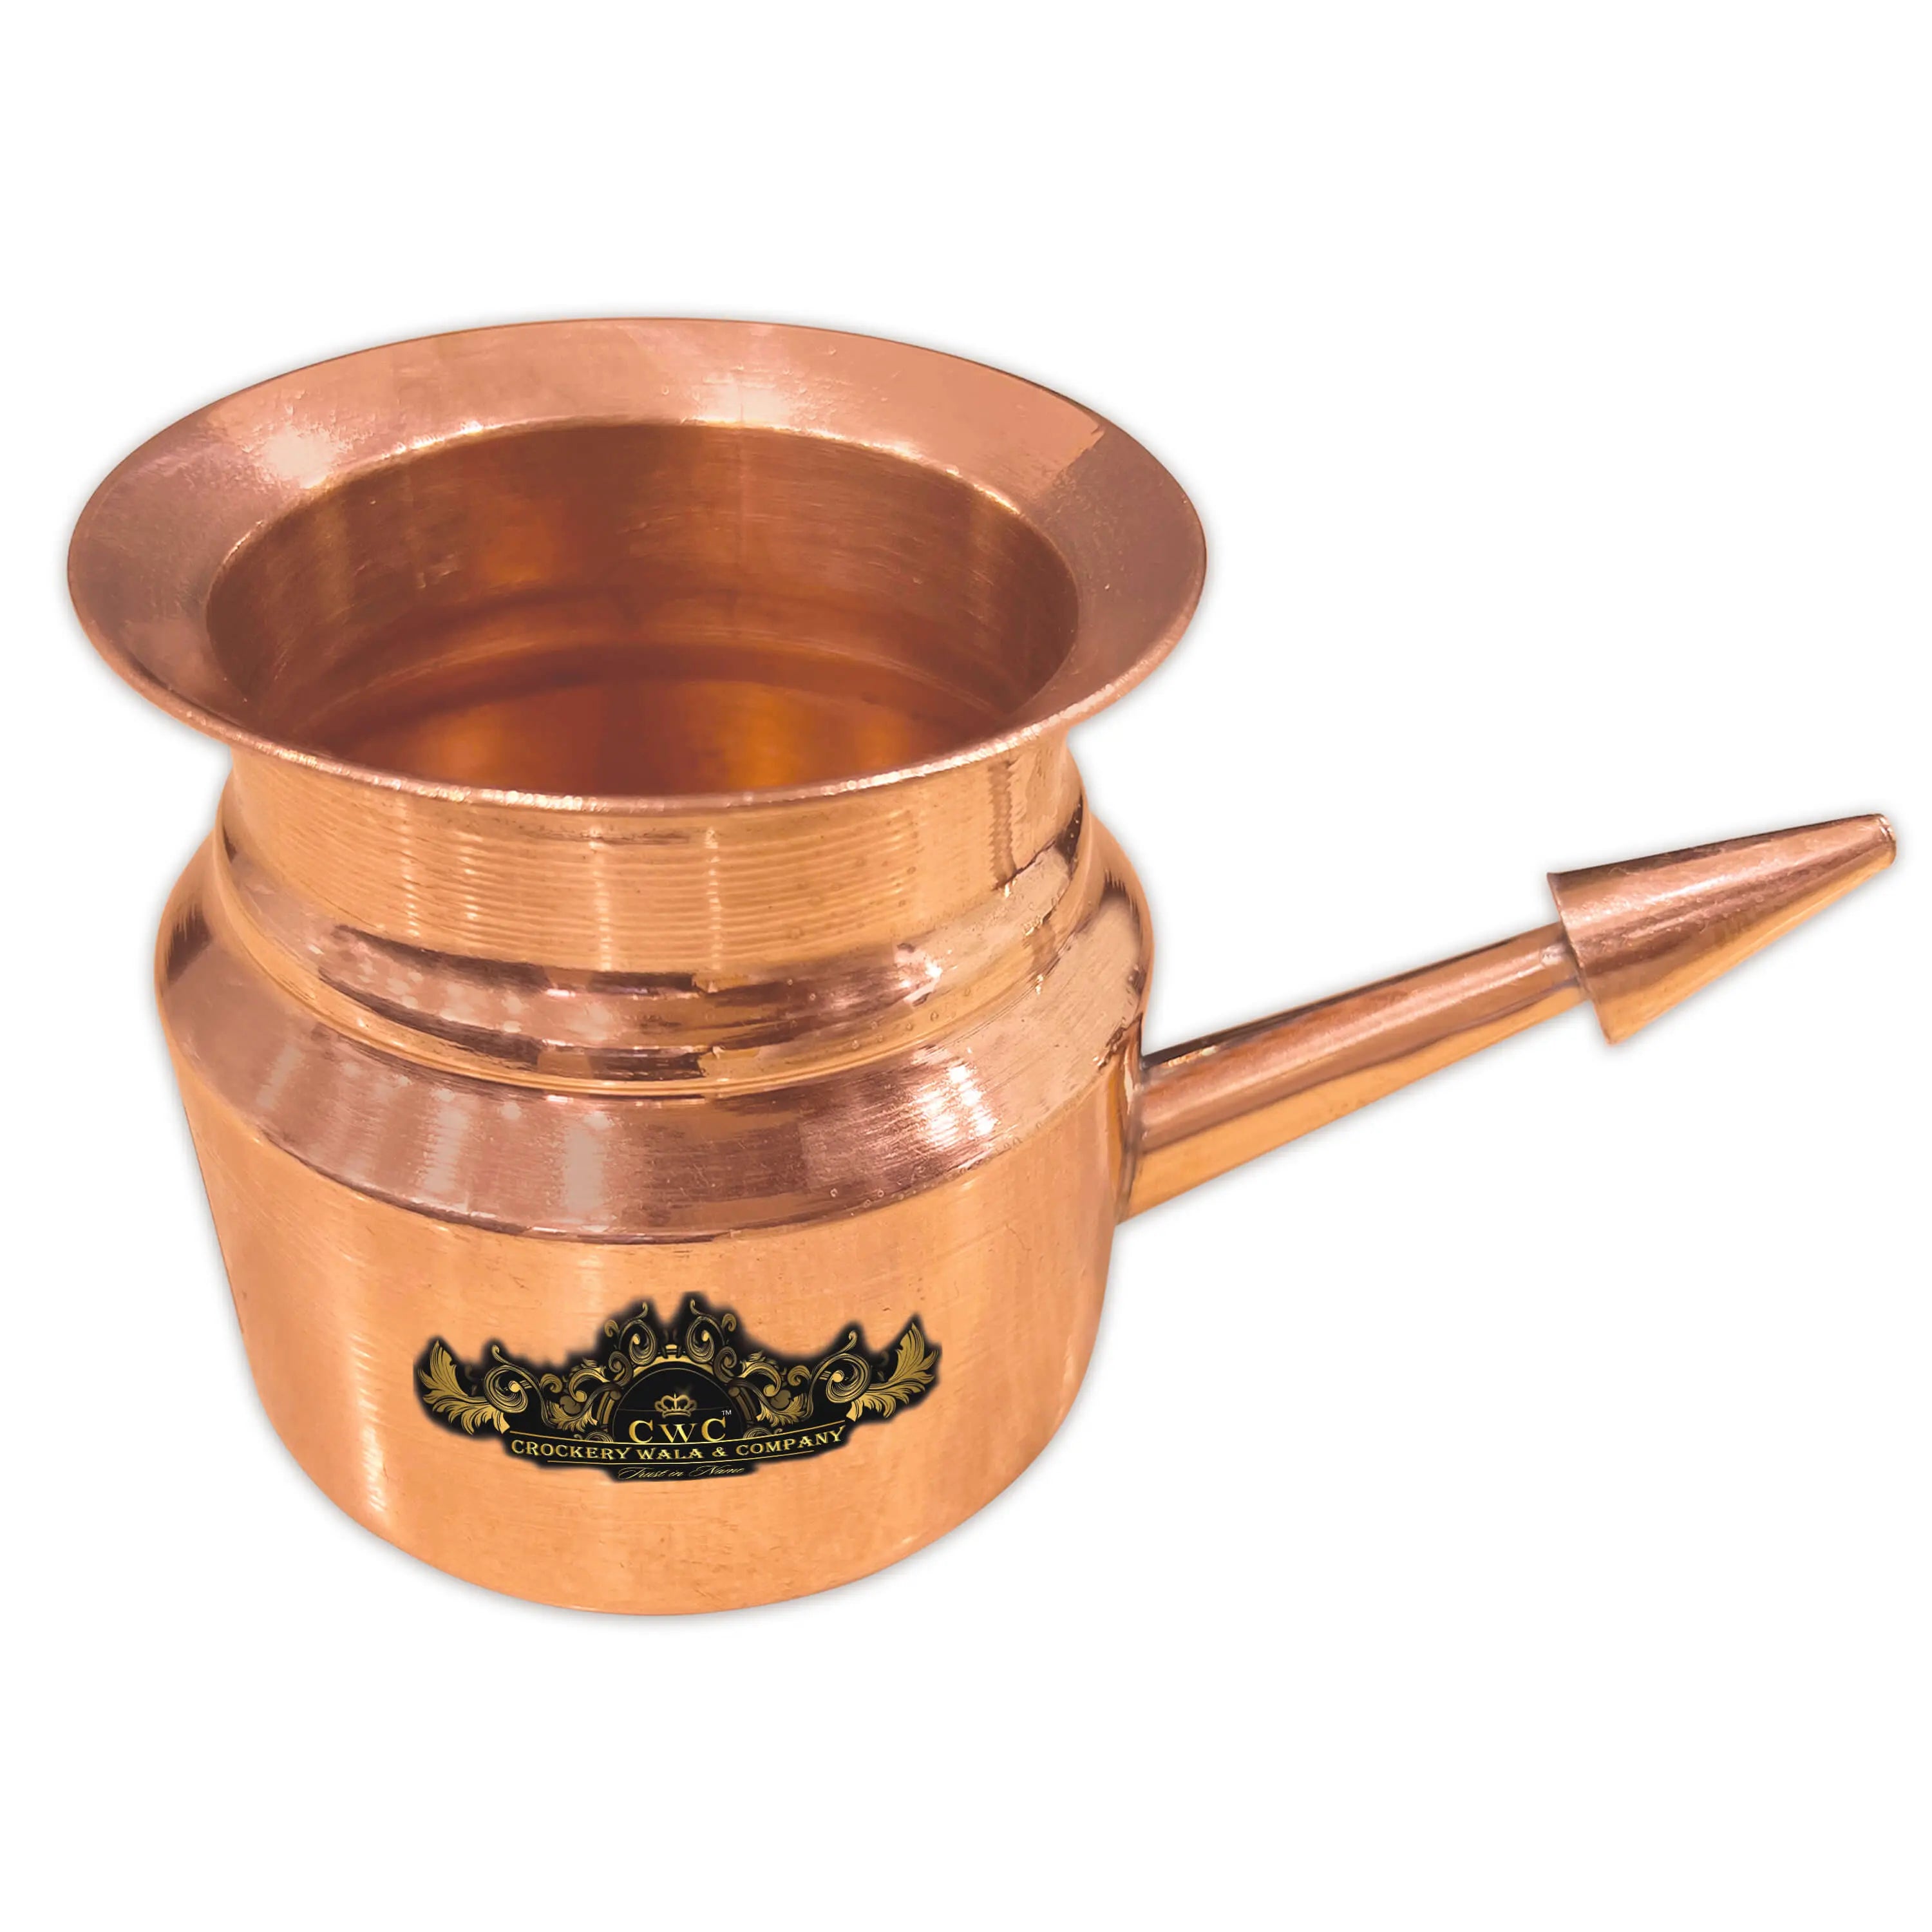 Copper Jal Neti Lota/Pot Vessel For Nasal Cleaning - CROCKERY WALA AND COMPANY 